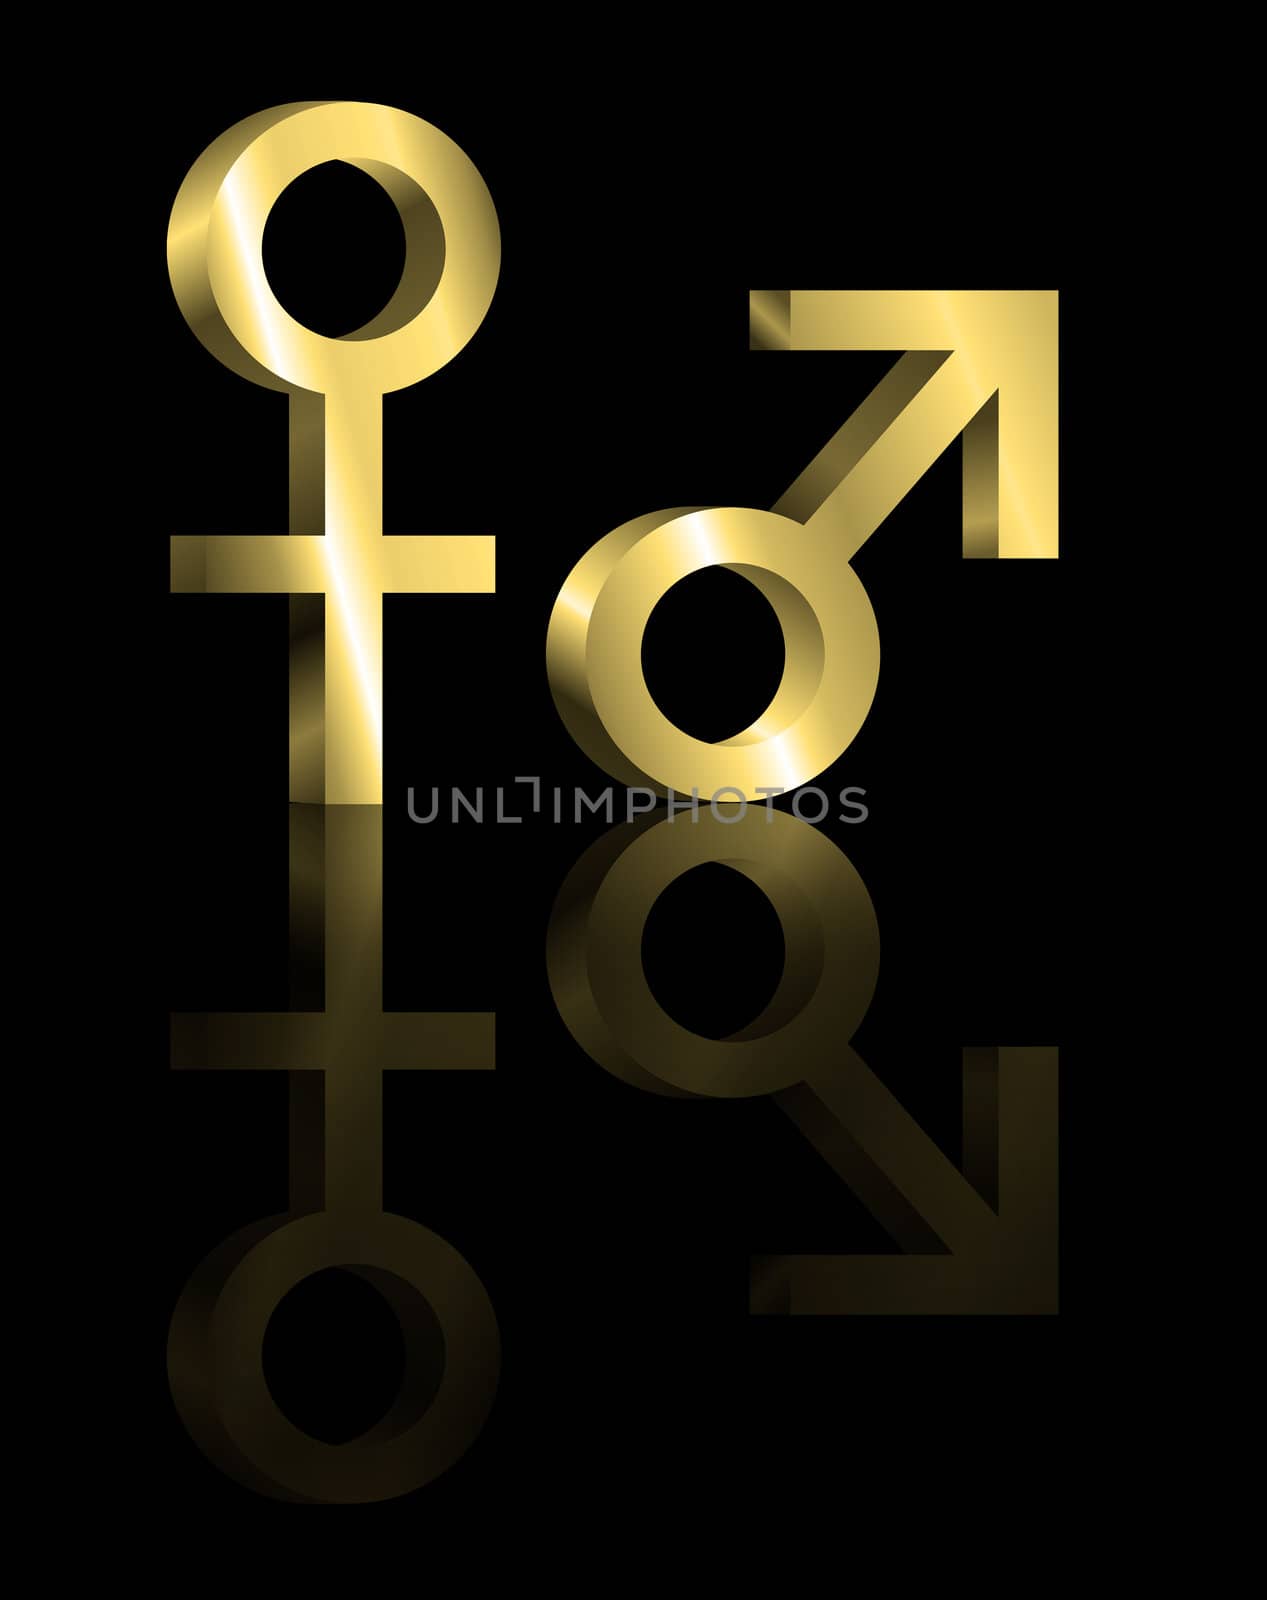 Illustration depicting gold male and female symbols arranged over black and reflecting into the foreground.